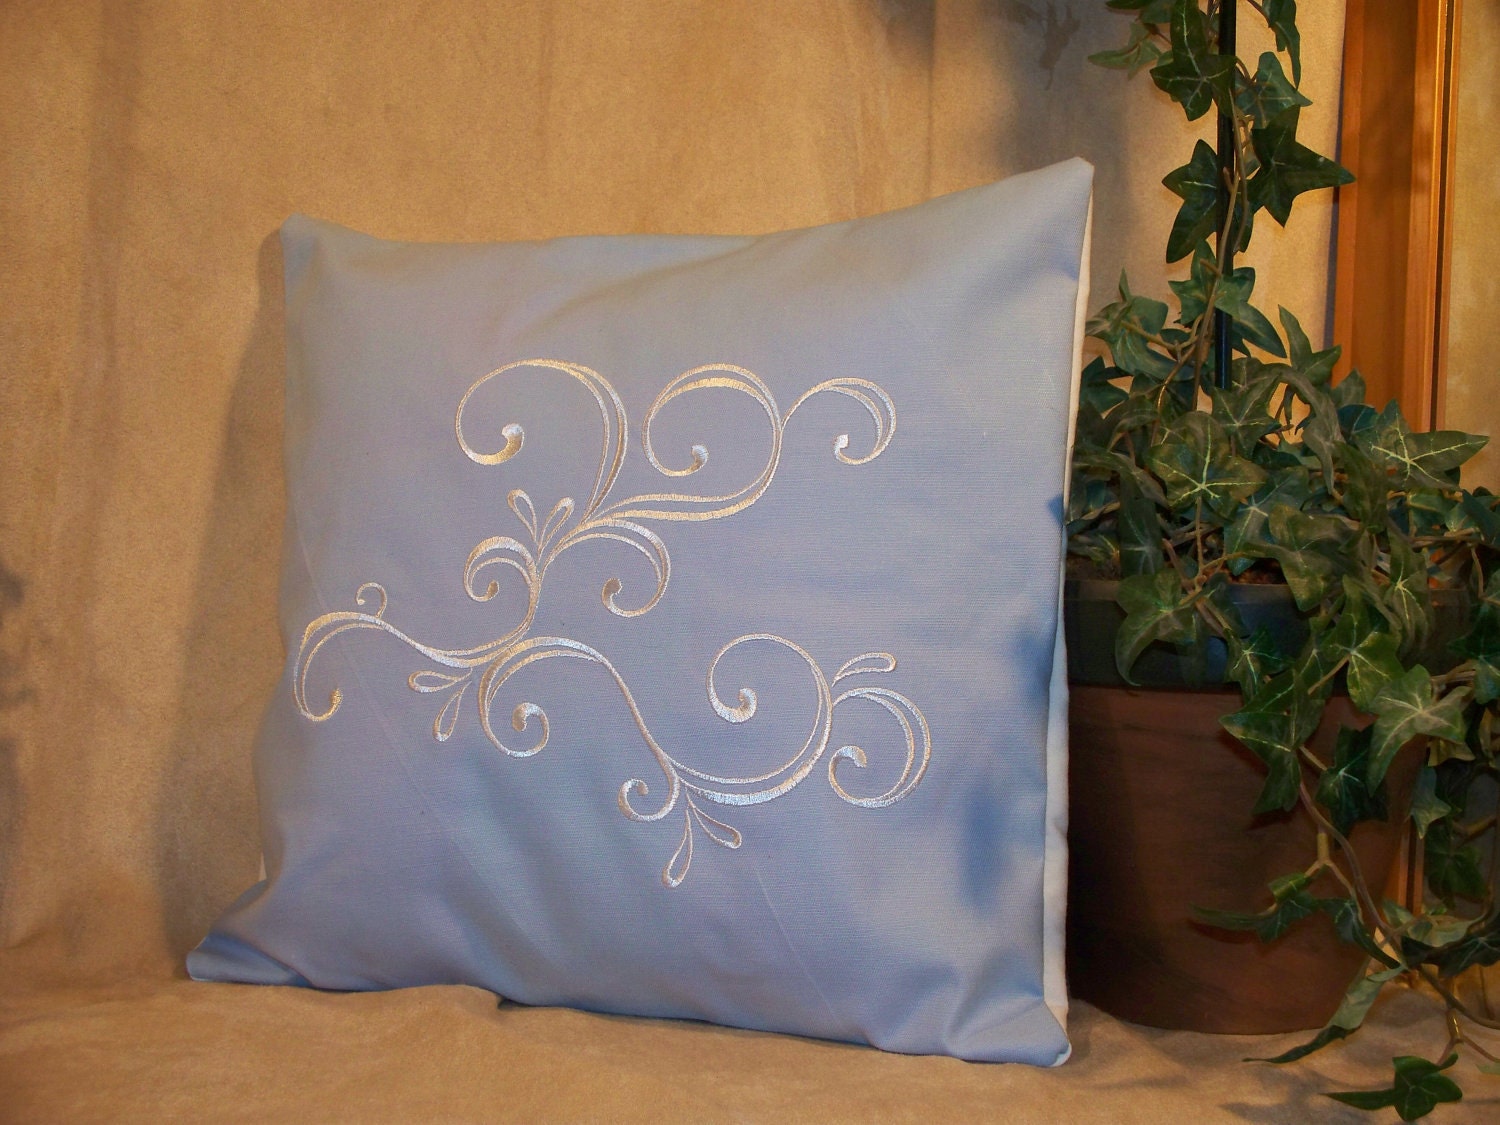 12" x 12" Light Blue with White Embroidered Swirl Decorative Pillow Cover